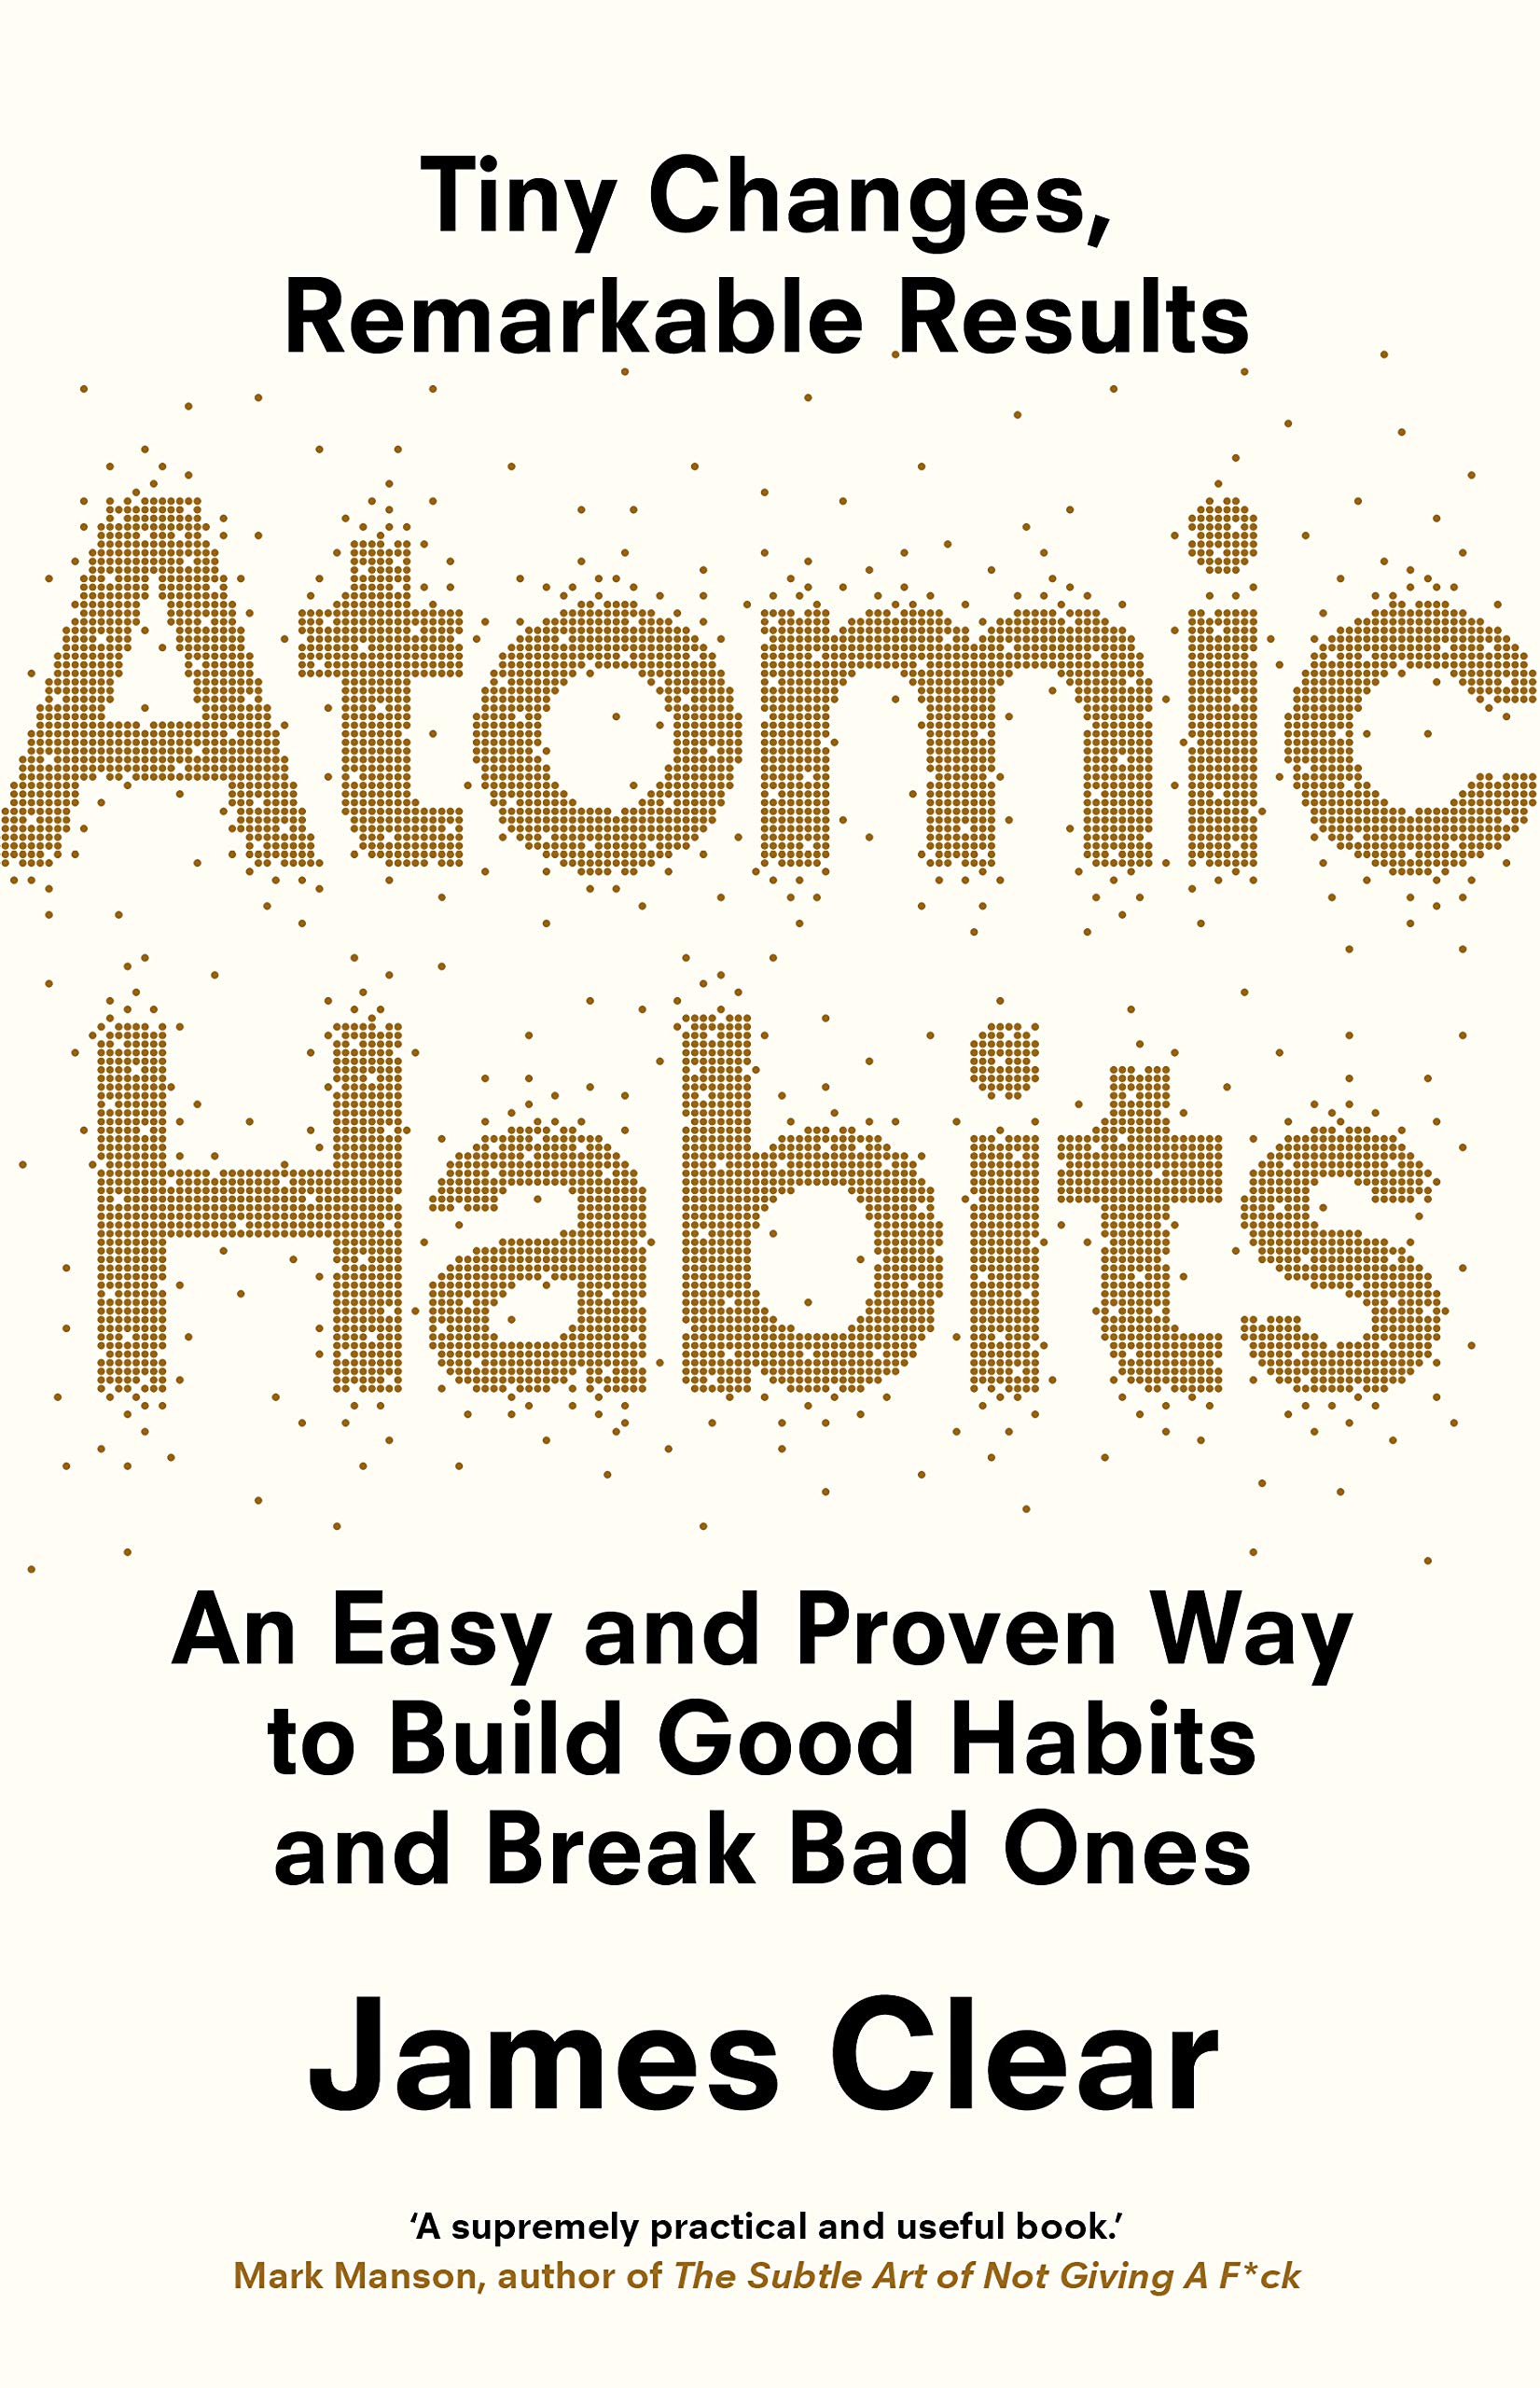 Atomic Habits | James Clear